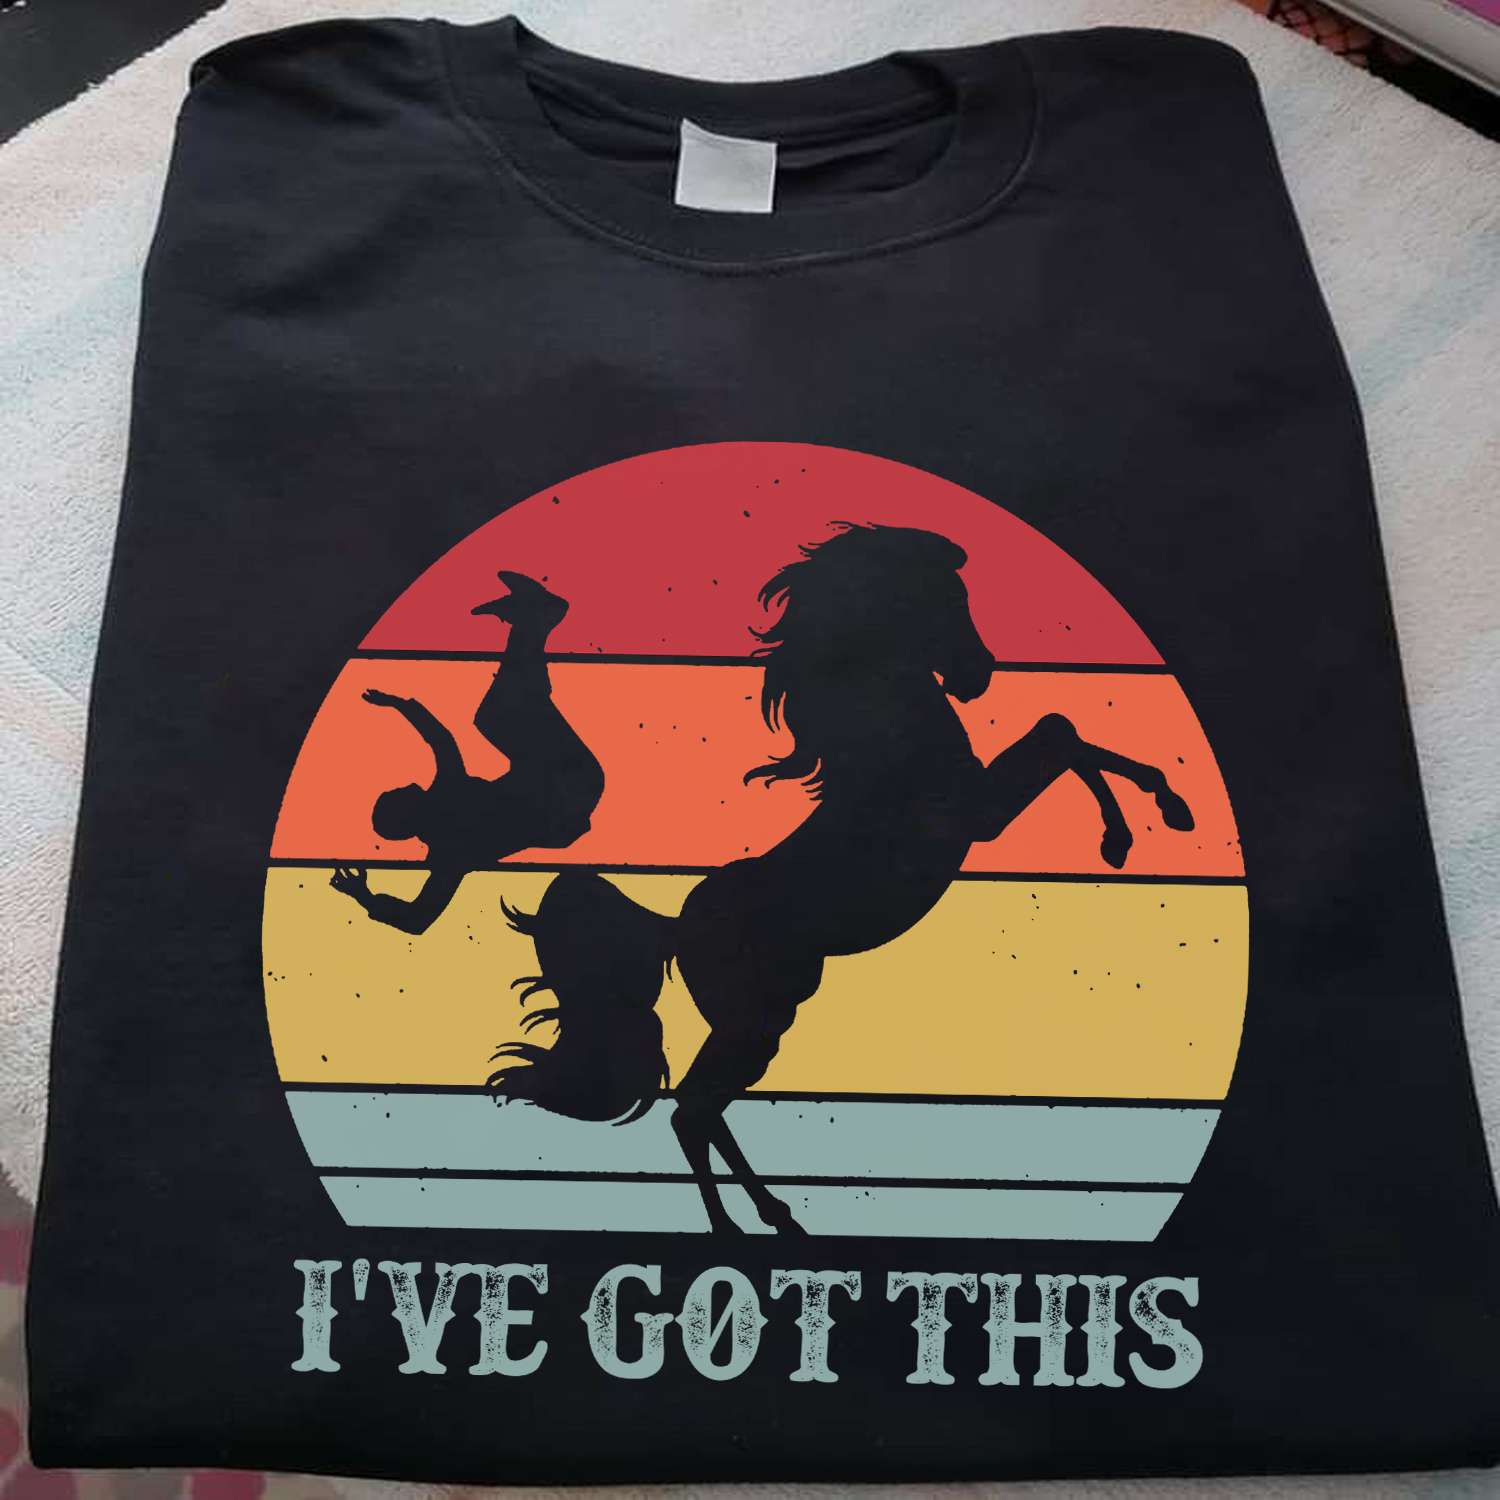 I've got this - Falling from horse, riding horse the hobby